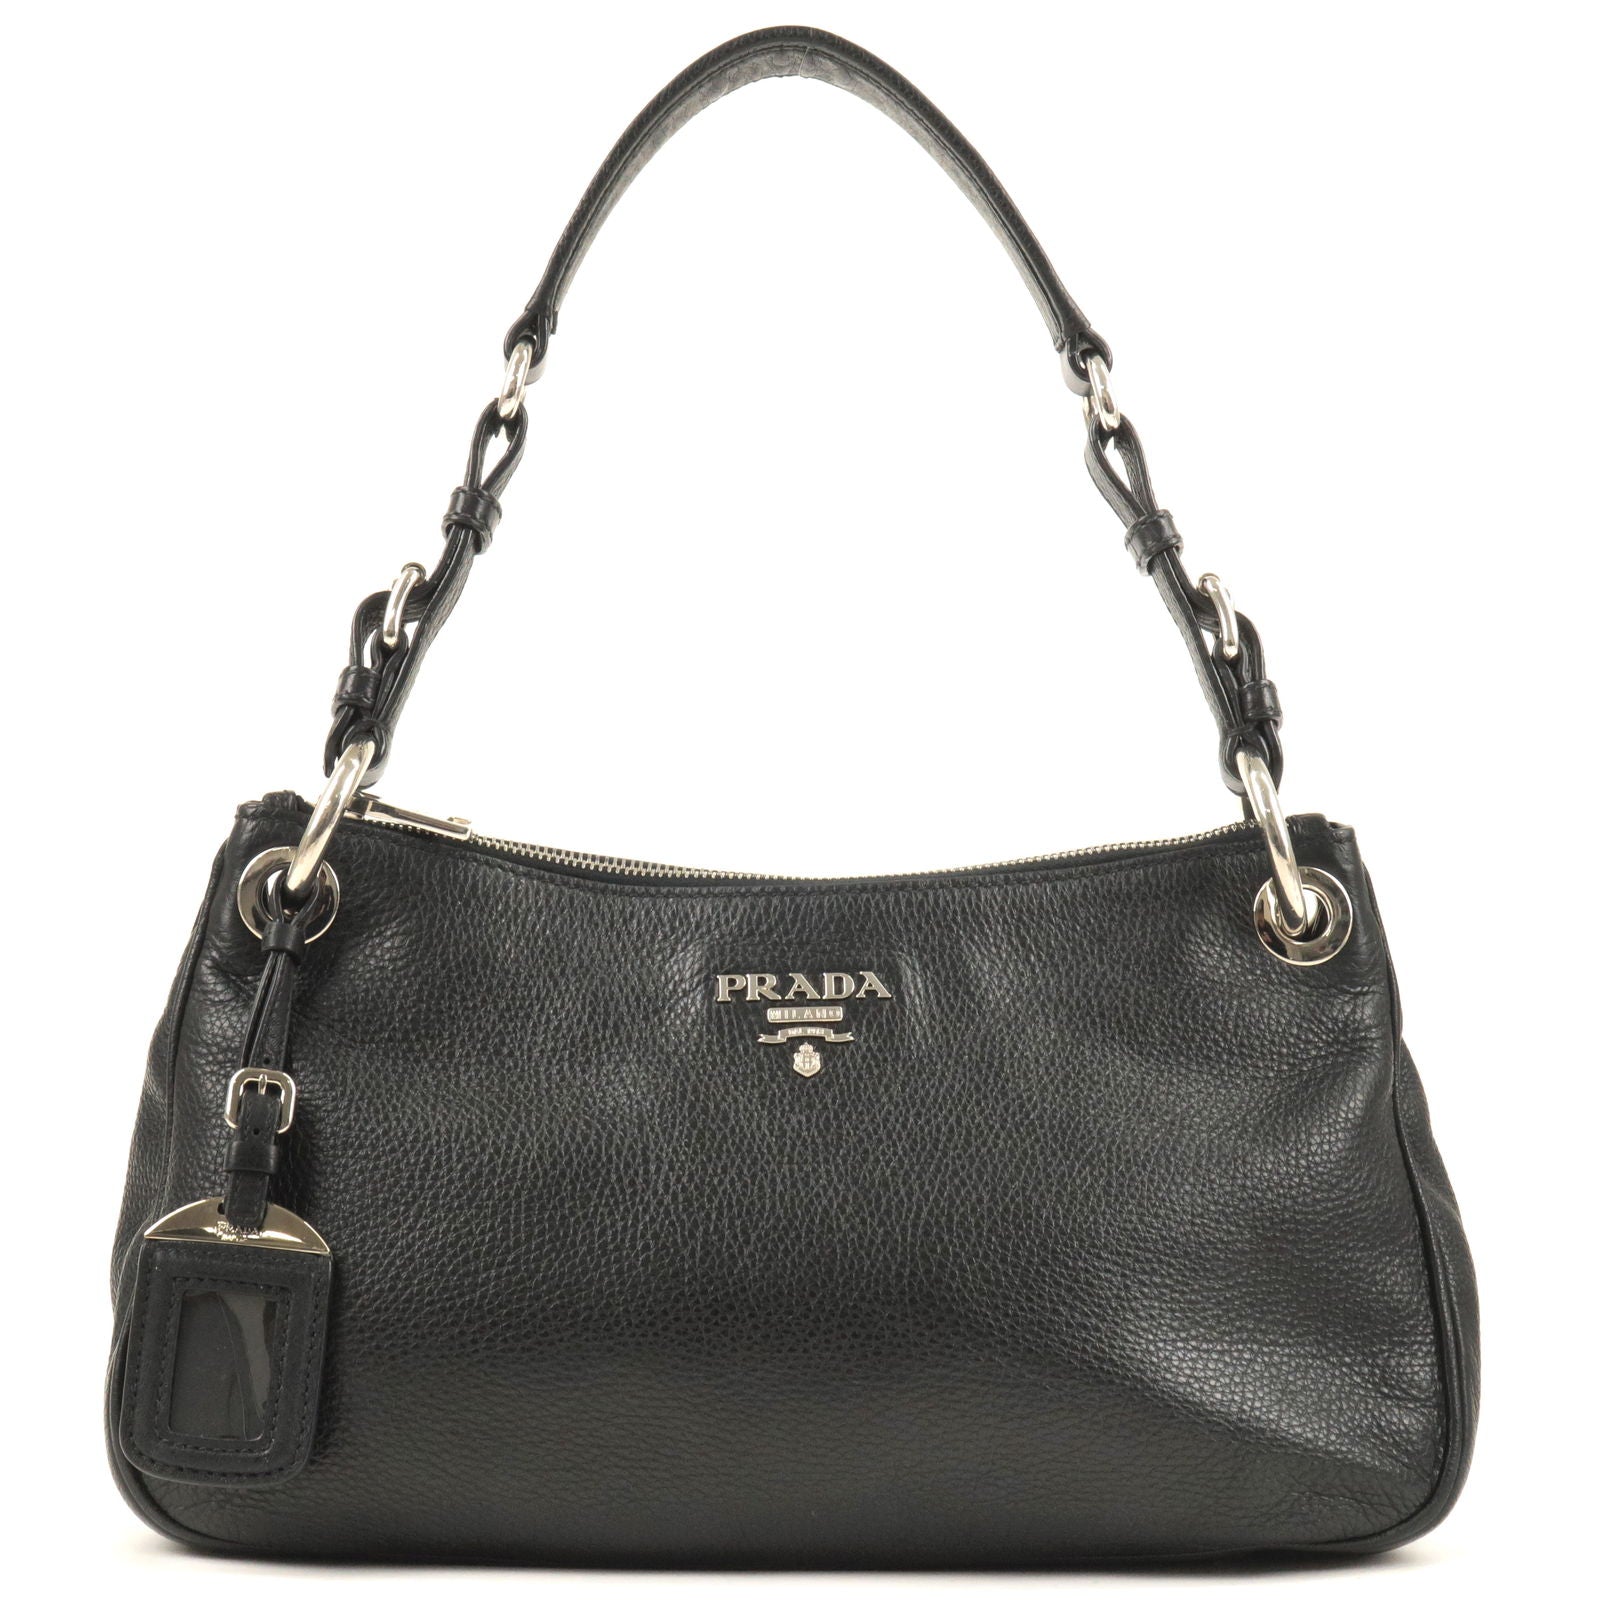 PRADA Re-Edition 2005 Re-Nylon Shoulder Bag Black with Pouch Chain